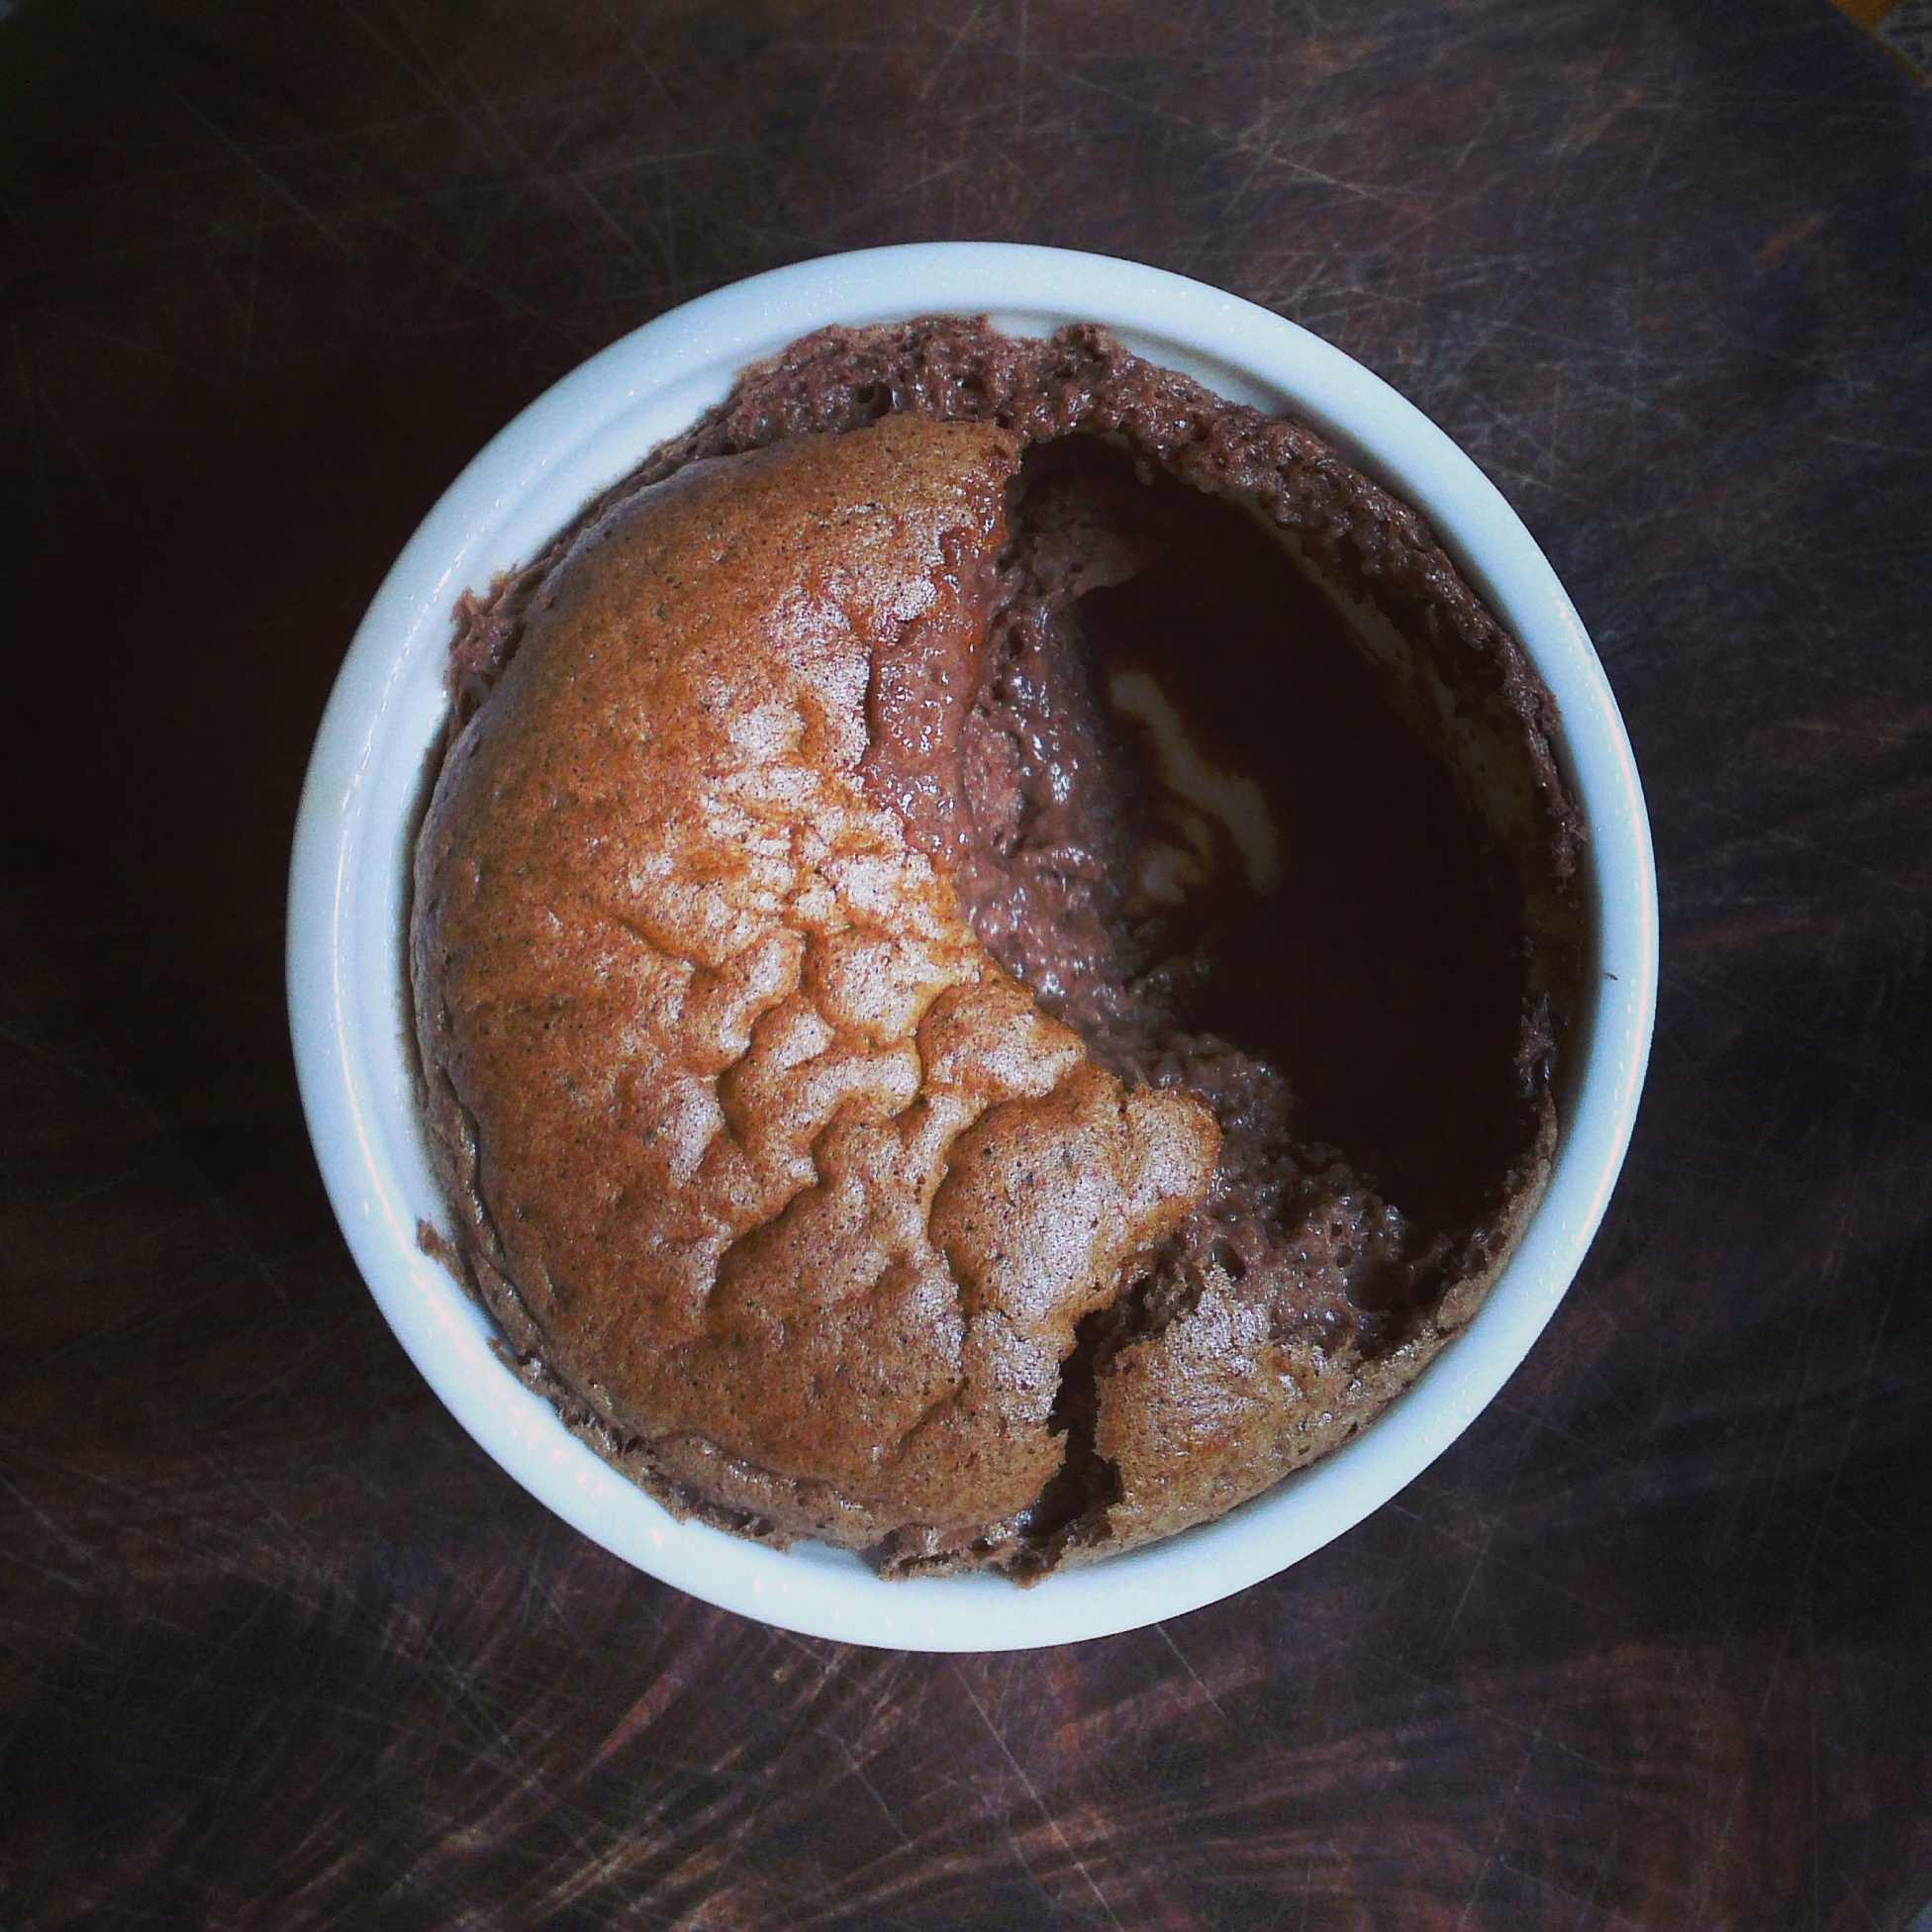 Chocolate Soufflé, the right way